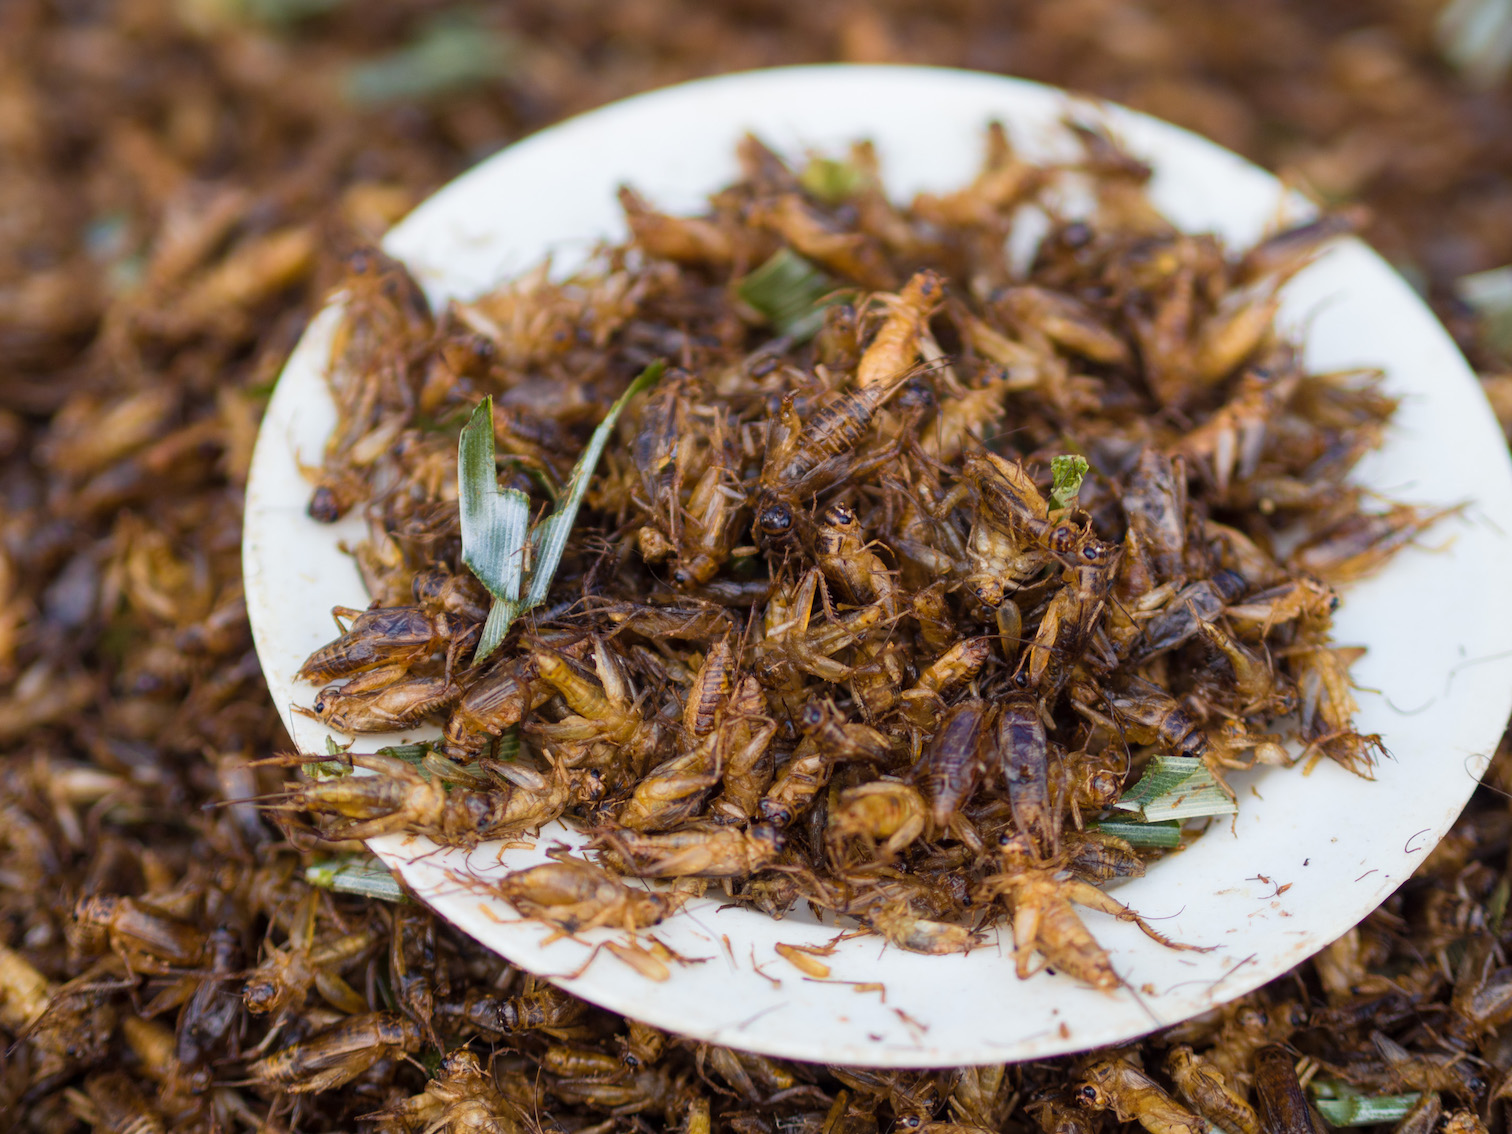 UN, WEF push for insect meat consumption amid massive attack on global food supply